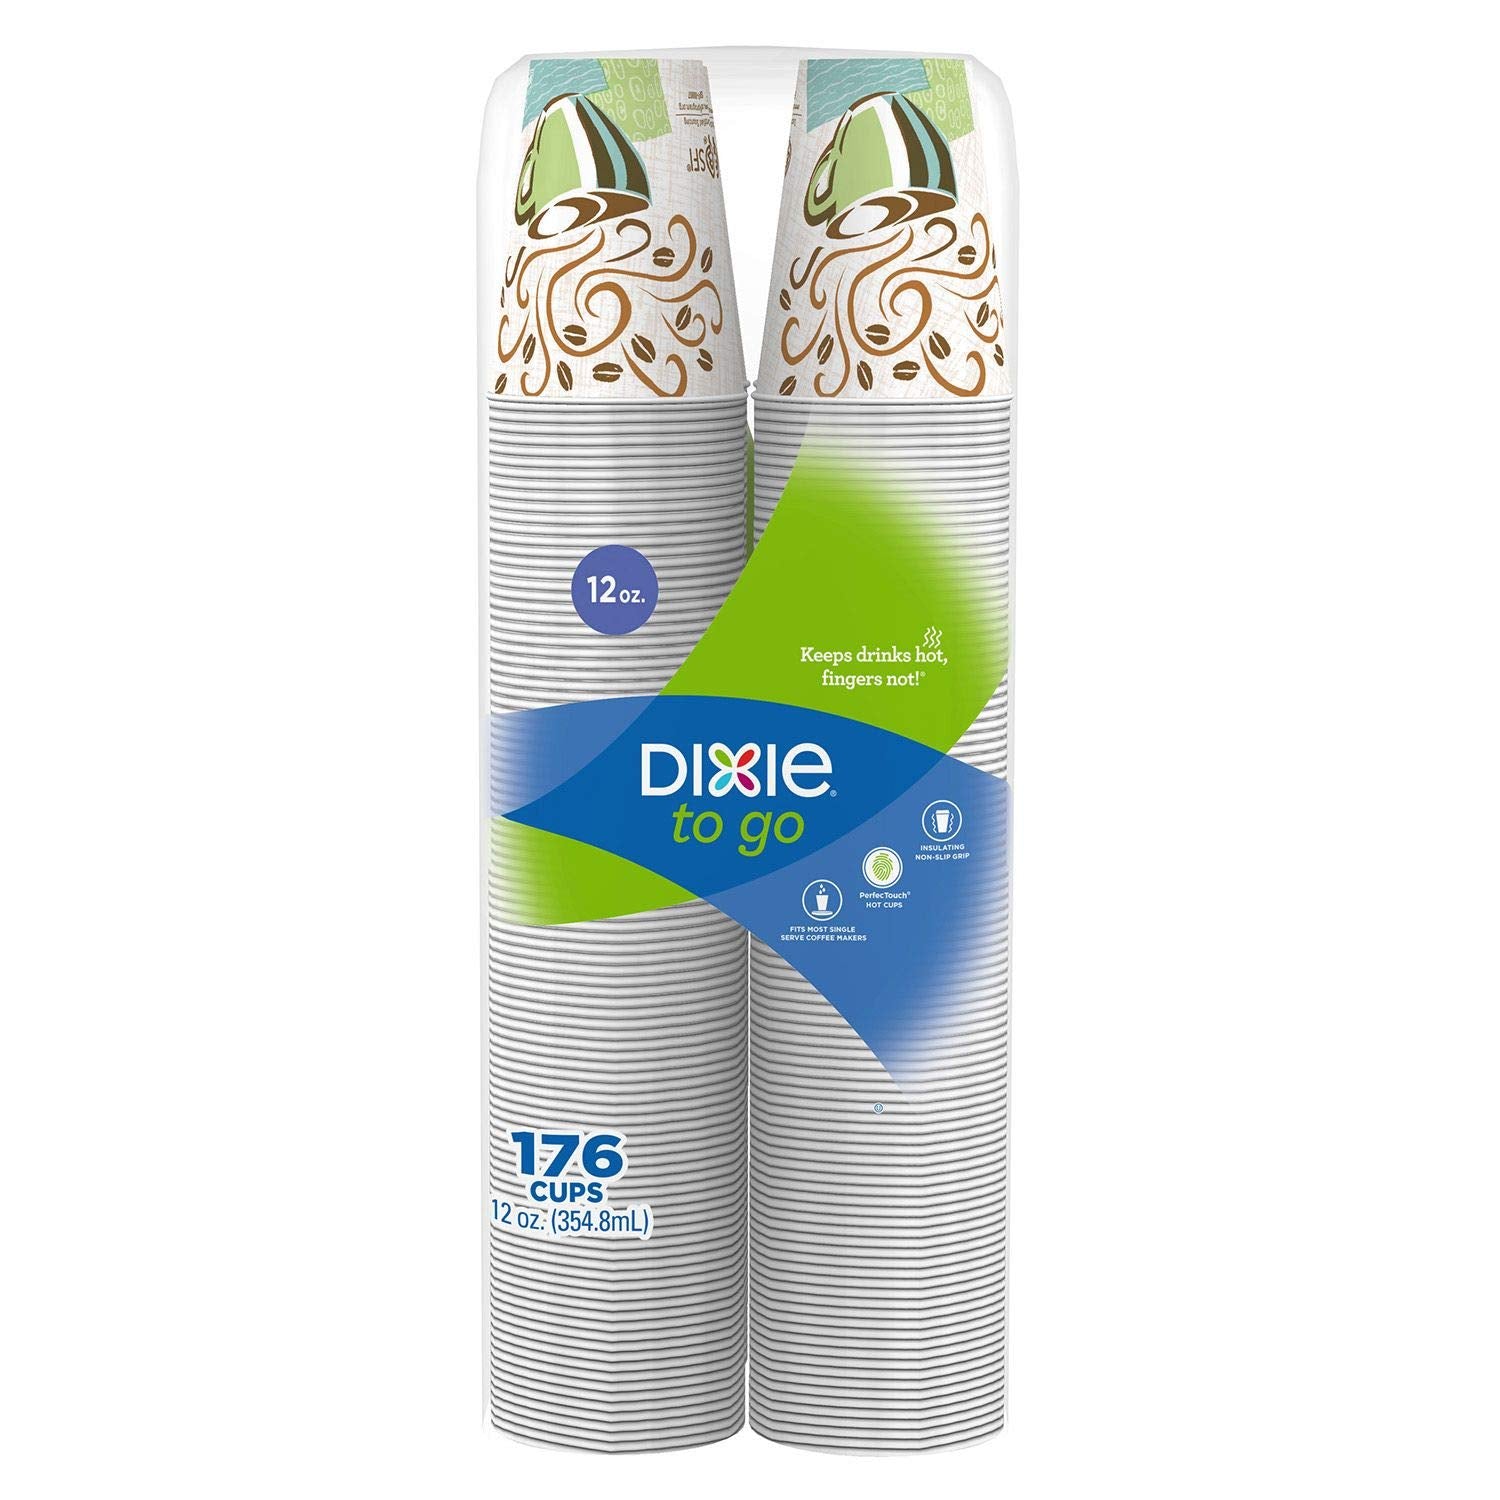 Dixie PerfecTouch Insulated Paper Cups 12oz 176ct